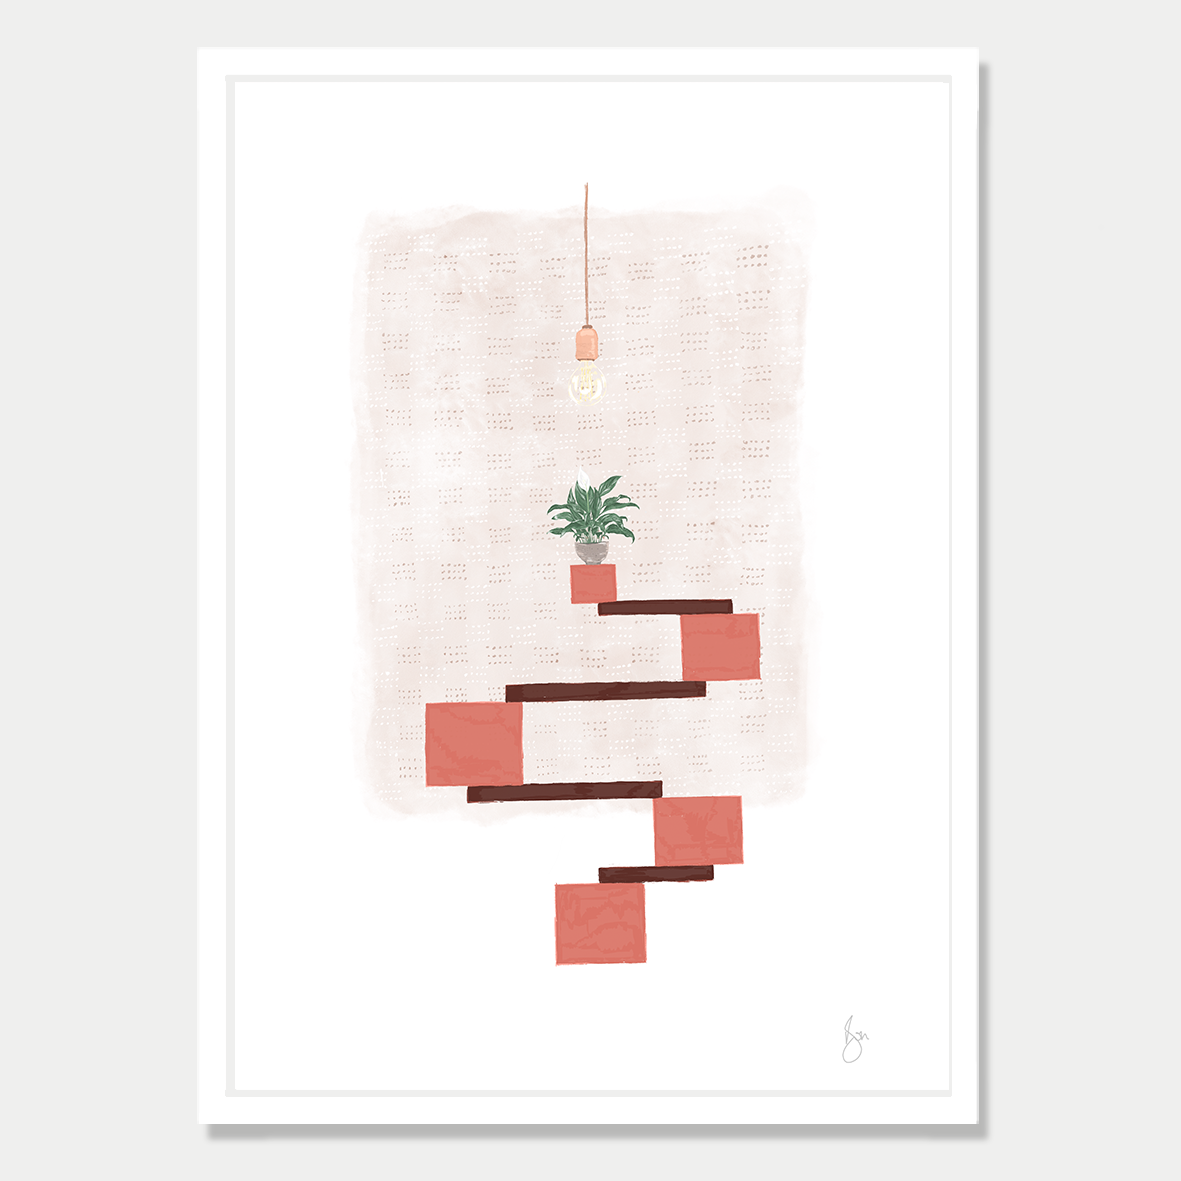 Art print of several blocks balancing with a peace lily sitting on top and a light blub hanging from above, in soft autumn colour palette by Bon Jung. Printed in New Zealand by endemicworld and framed in white.